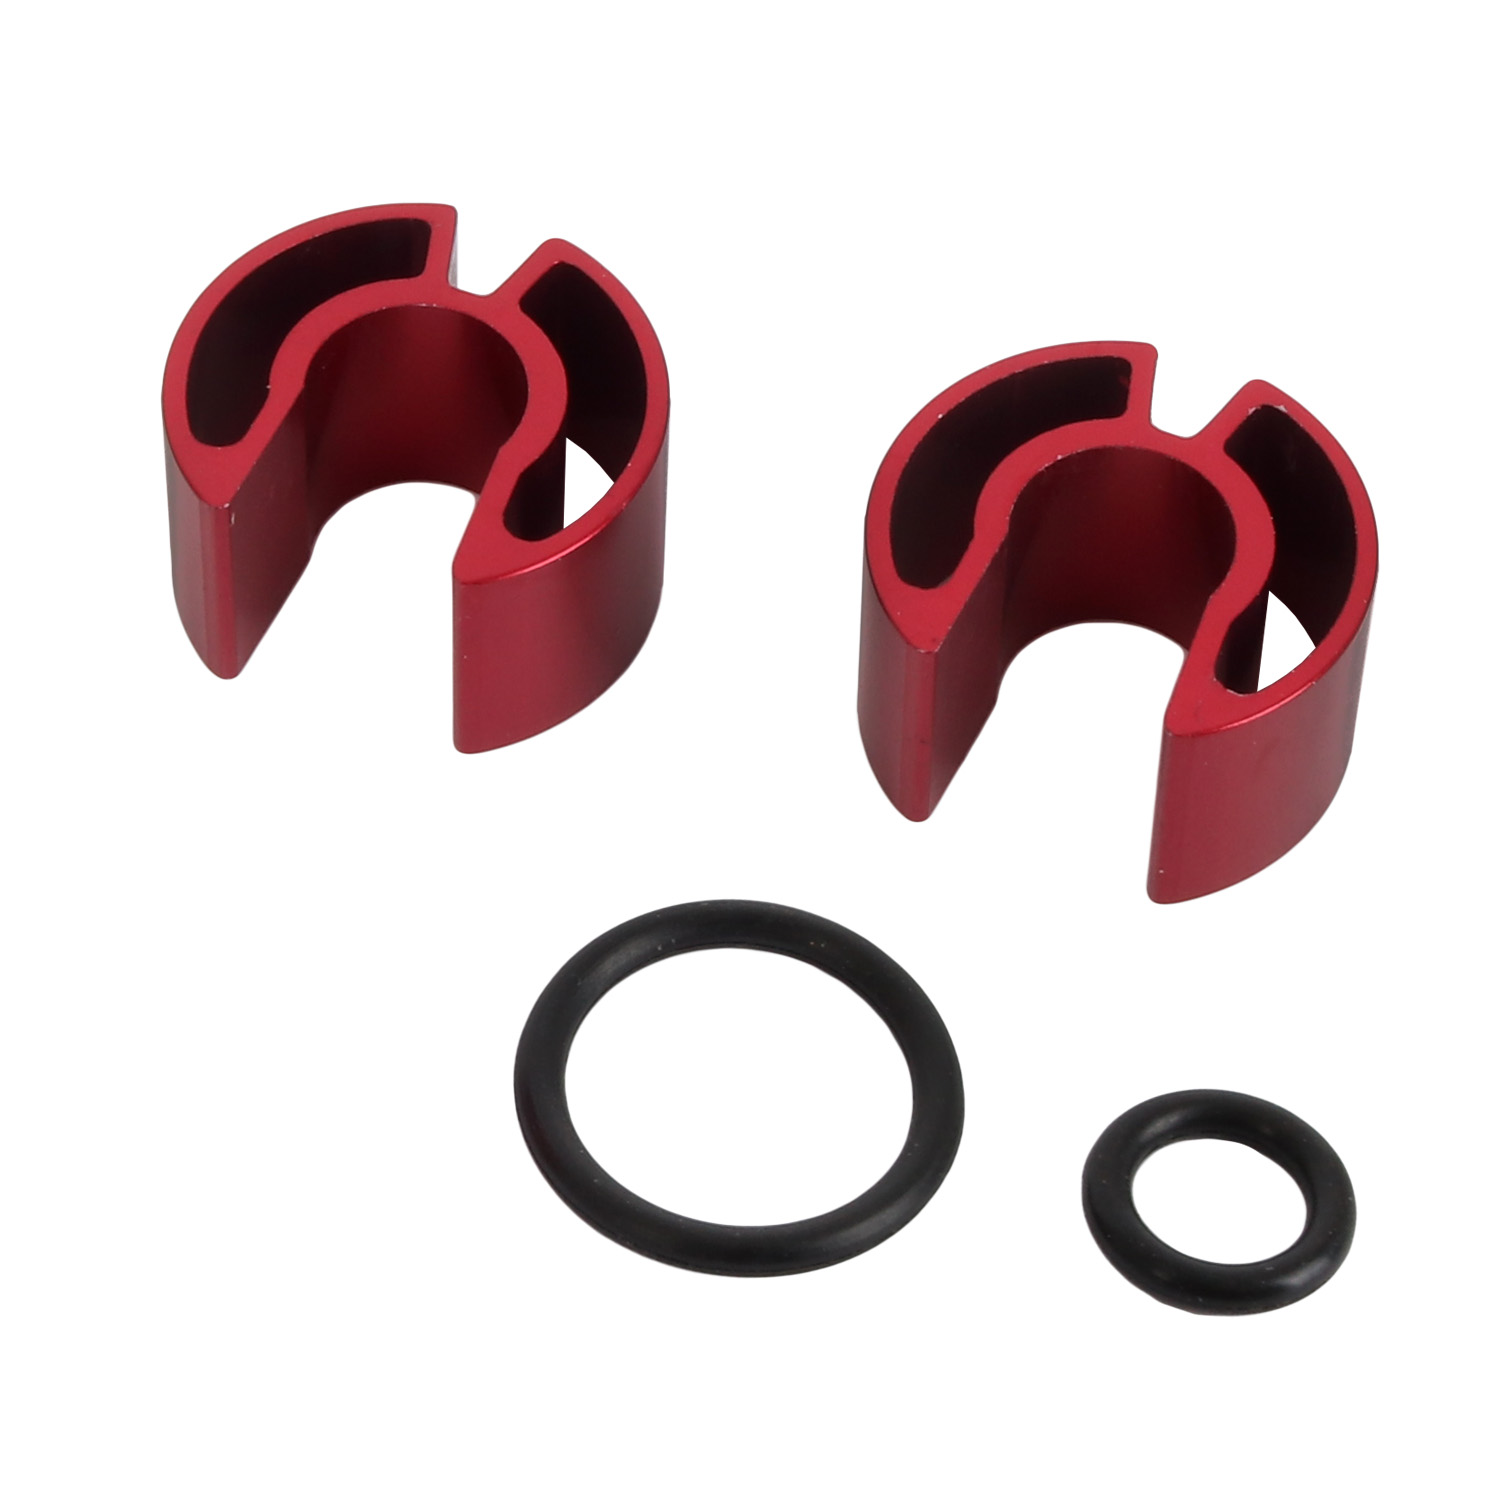 Picture of Cane Creek Helm Travel Reduction Kit, 2x 10mm Spacer